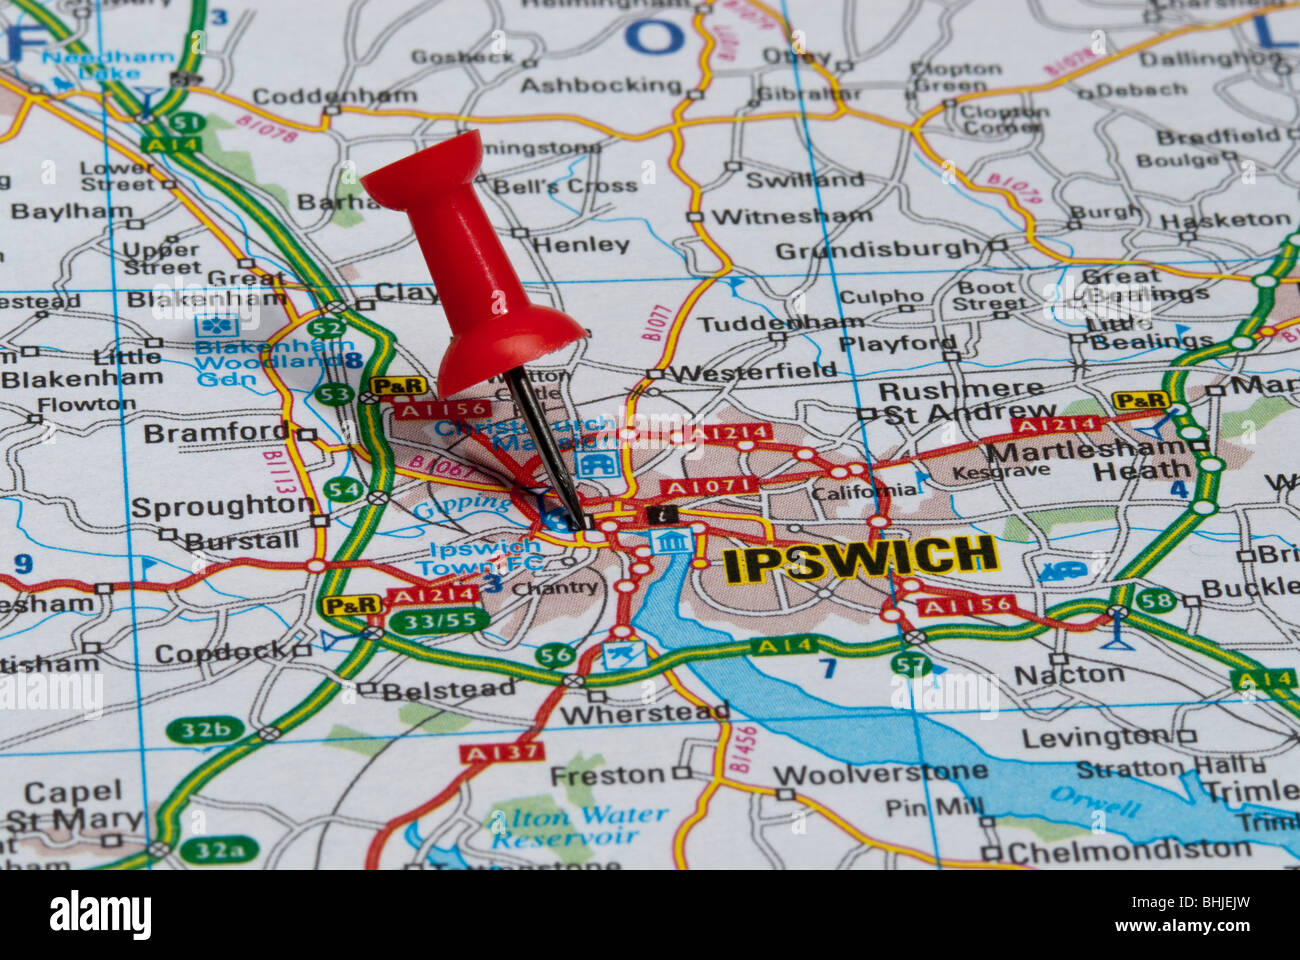 Red Map Pin In Road Map Pointing To City Of Ipswich BHJEJW 